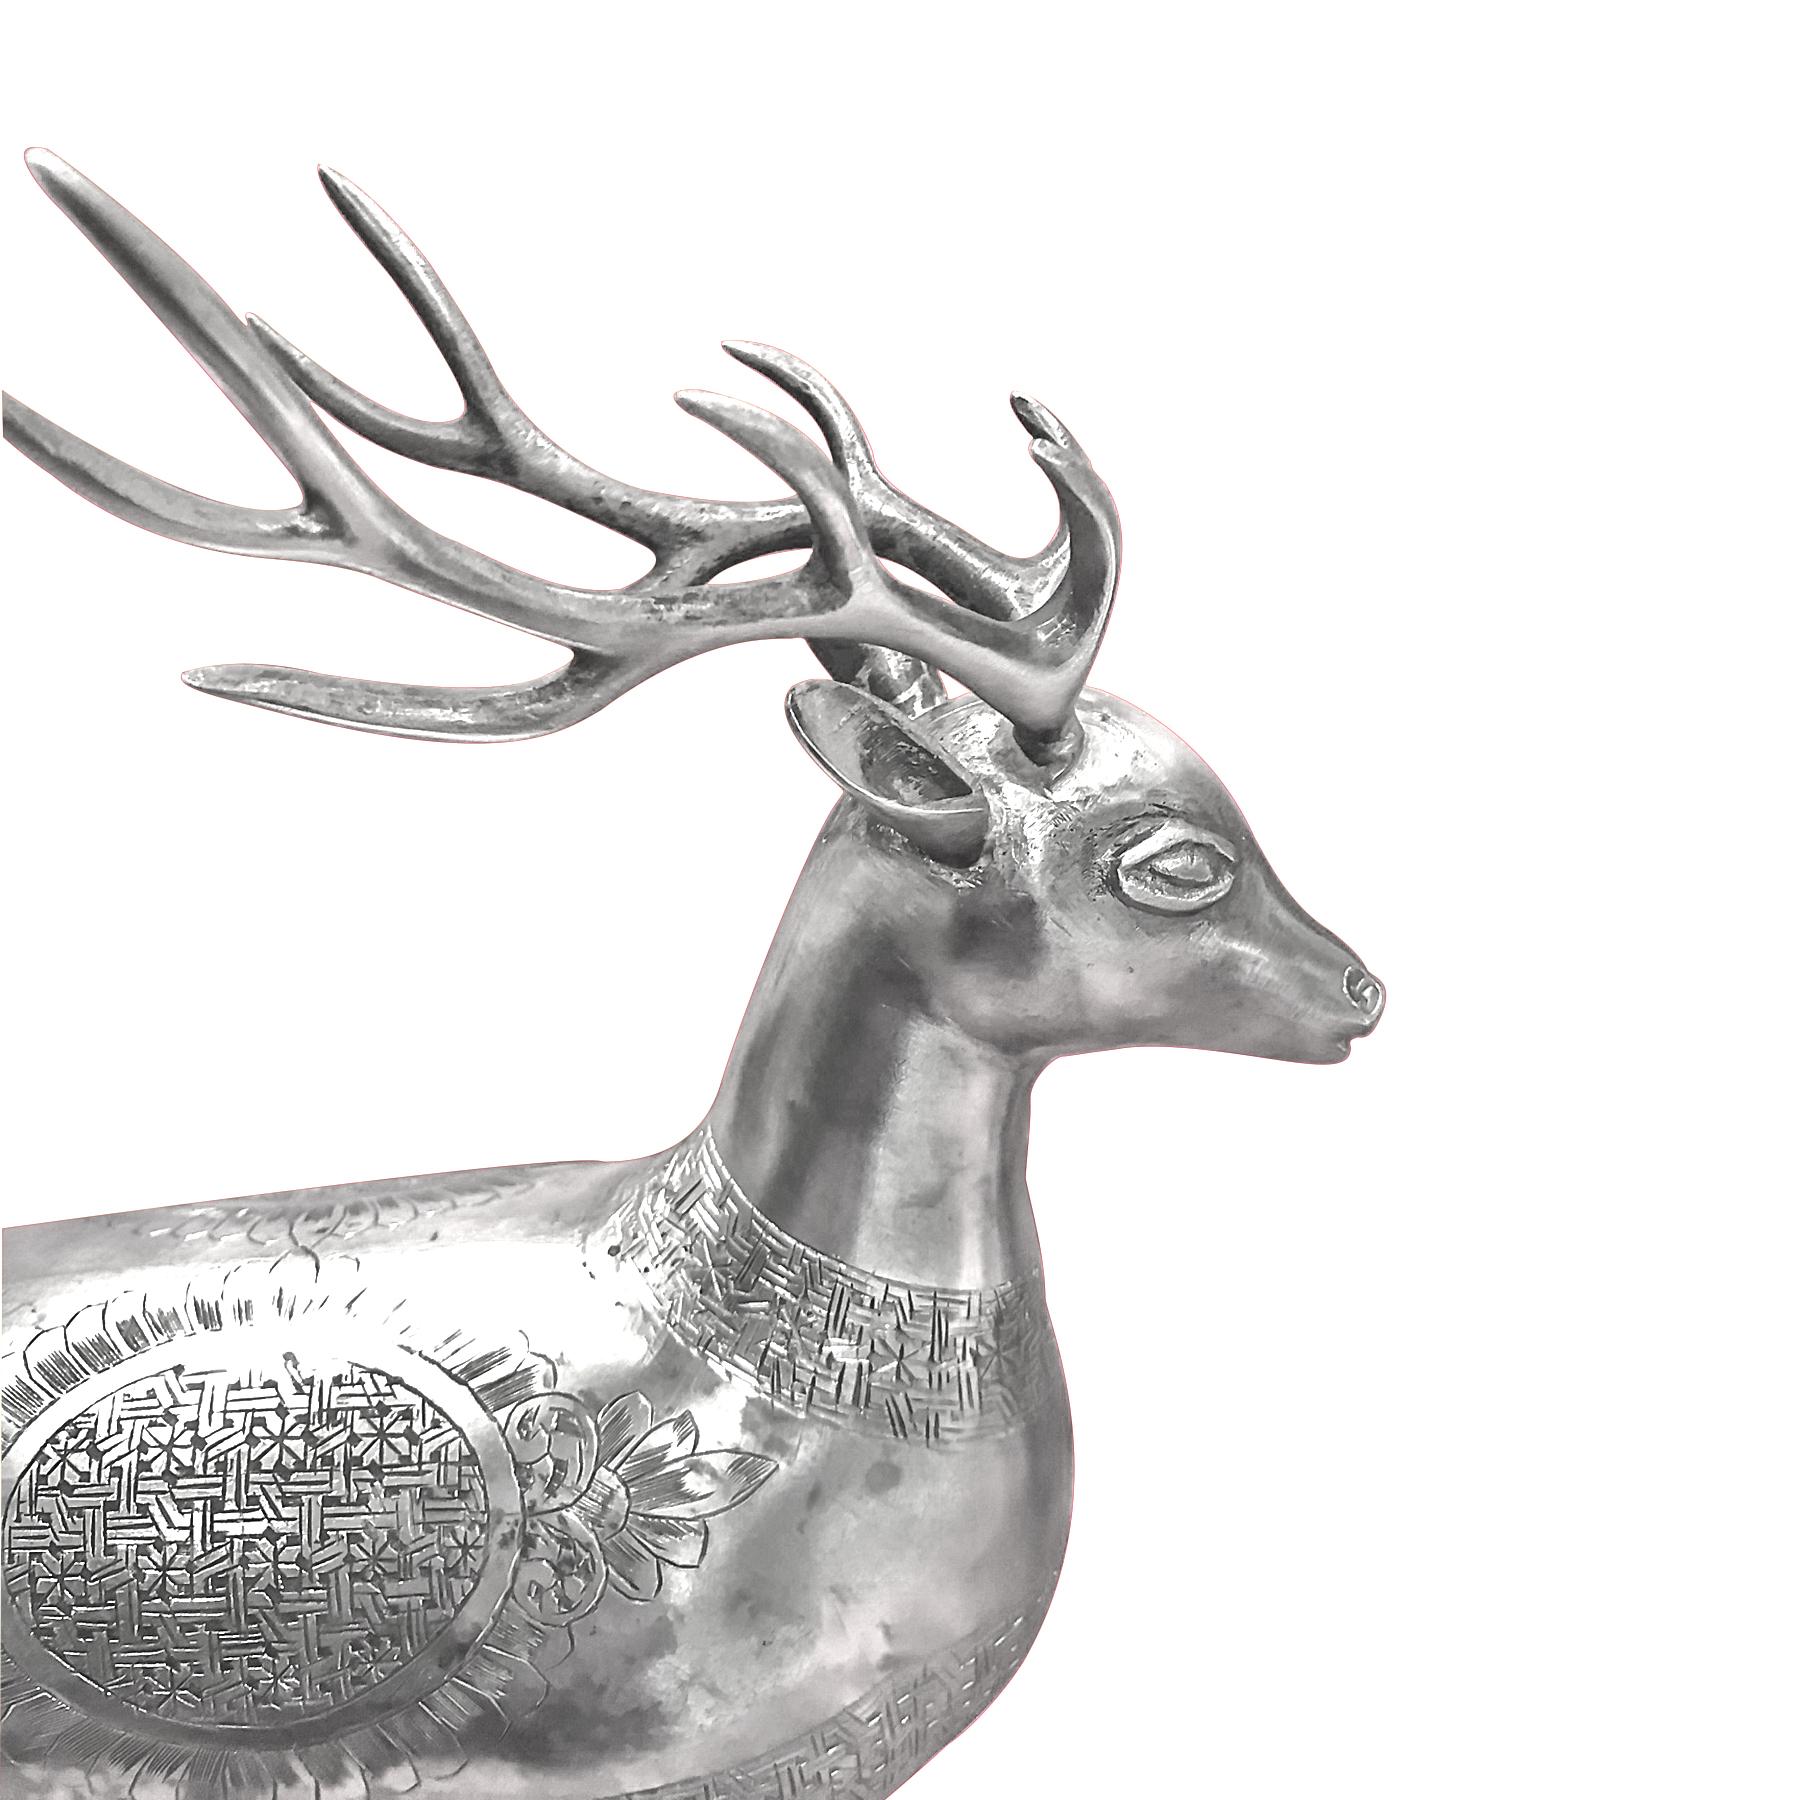 Antique, Gorgeous, Rare Pair of Deer Figurines in Silver, Handmade, Persian In Good Condition For Sale In Jackson Heights, NY